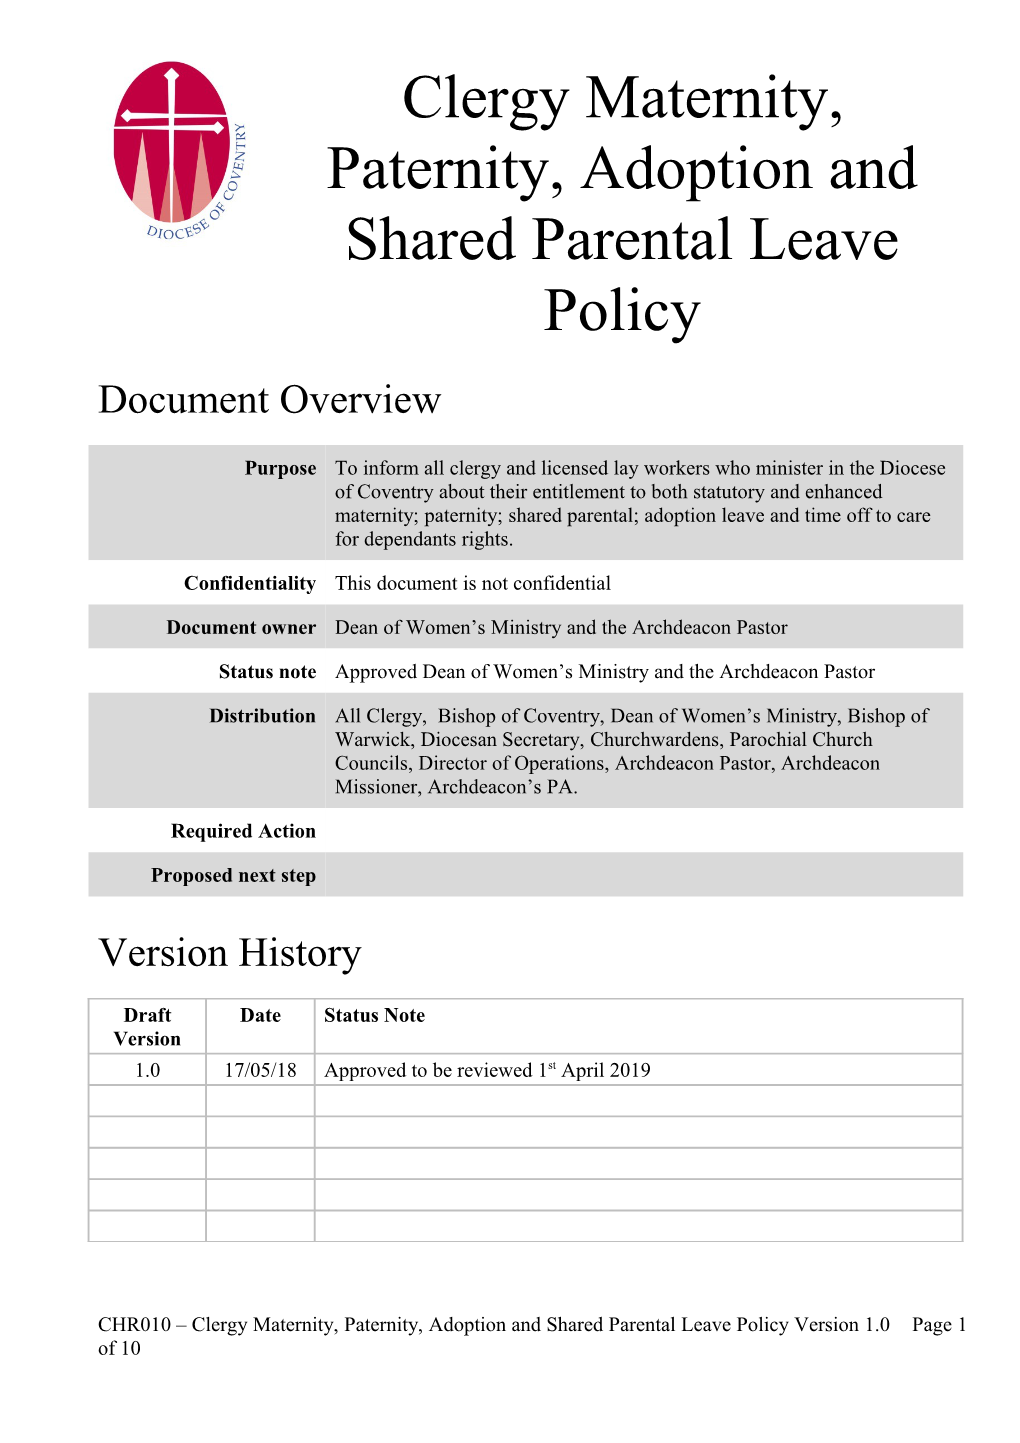 Clergy Maternity, Paternity, Adoption and Shared Parental Leave Policy